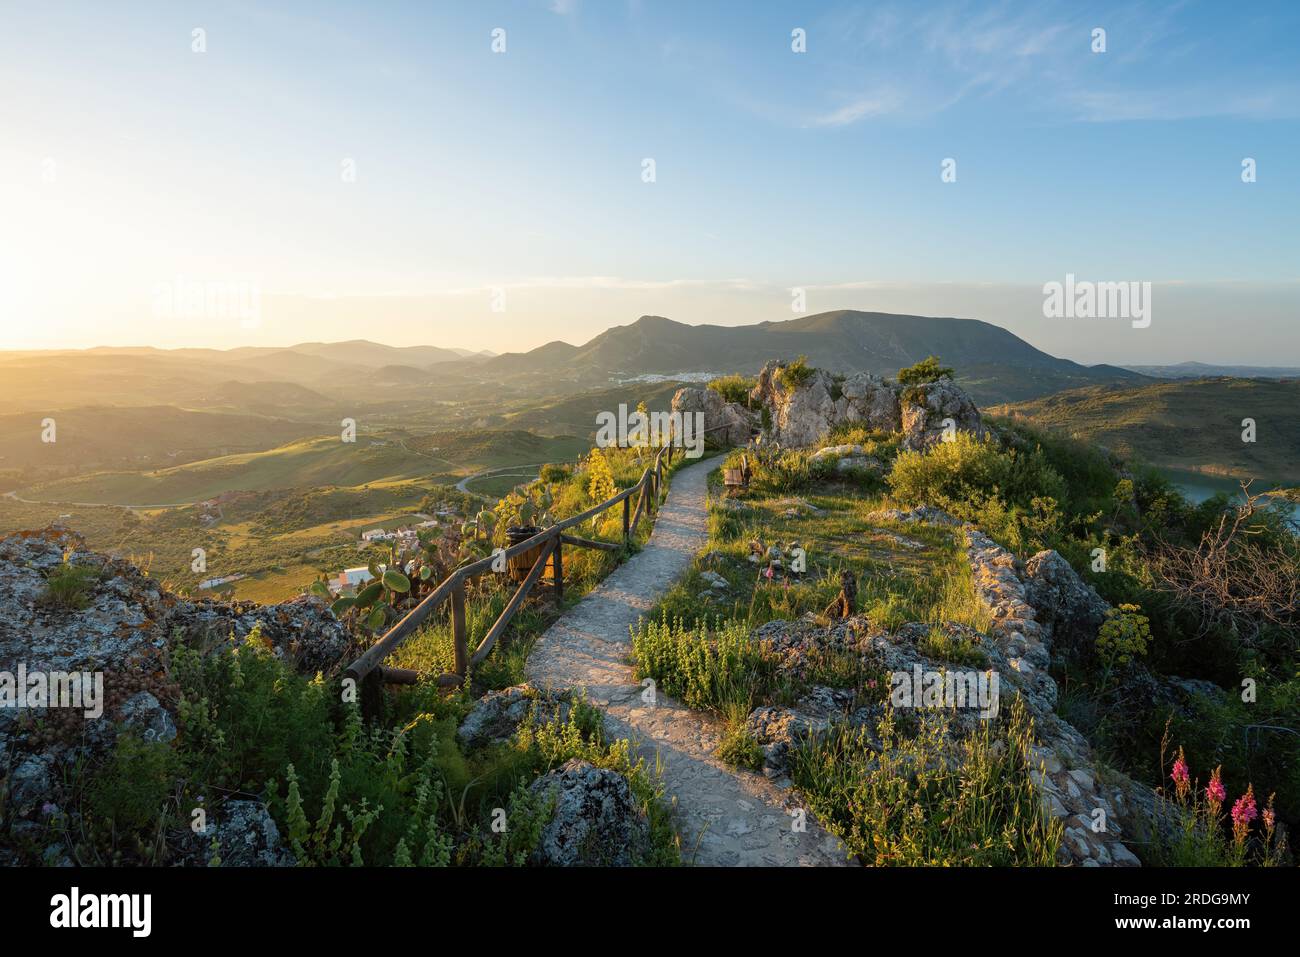 Walking path with wooden fence on the ruins of Zahara Castle at sunset - Zahara de la Sierra, Andalusia, Spain Stock Photo